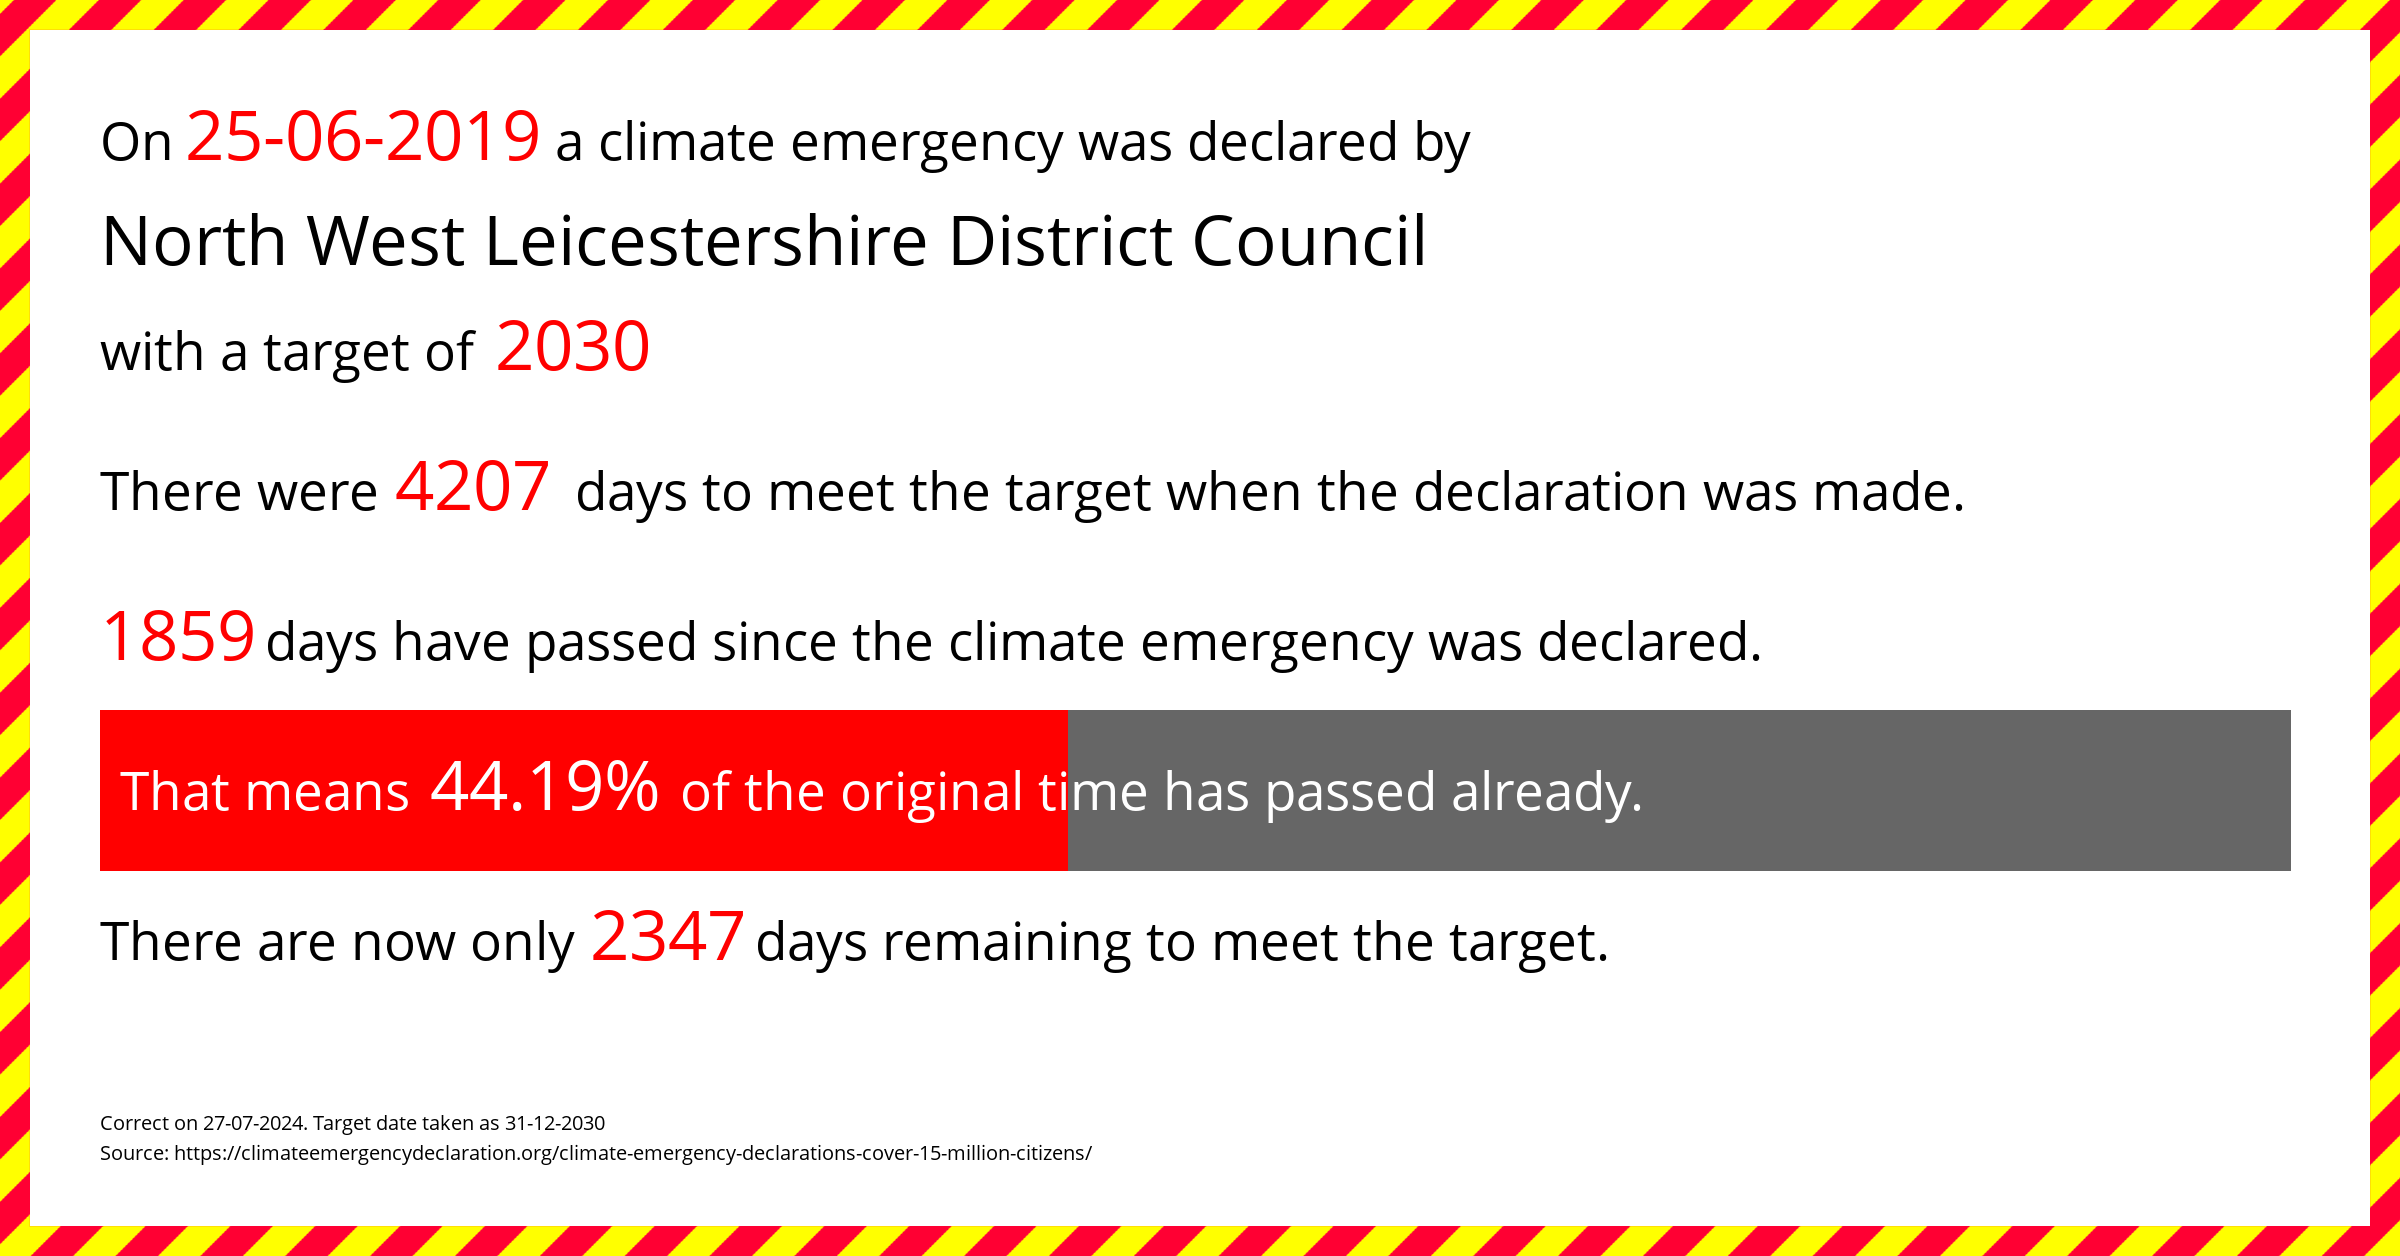 North West Leicestershire District Council  declared a Climate emergency on Tuesday 25th June 2019, with a target of 2030.